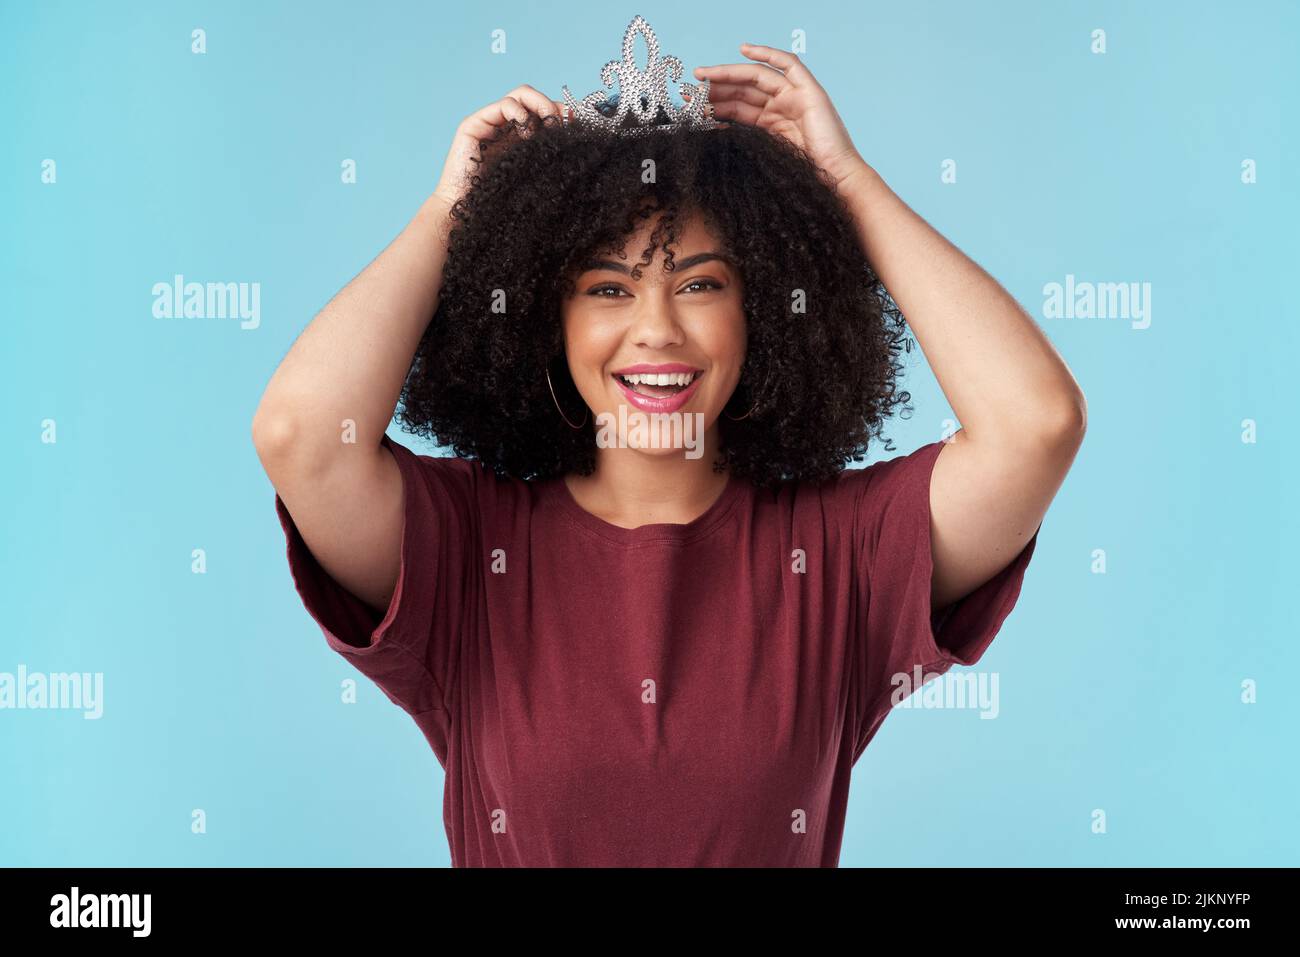 Whats a queen without her king Even more powerful. Studio shot of a young woman putting a crown her head against a blue background. Stock Photo